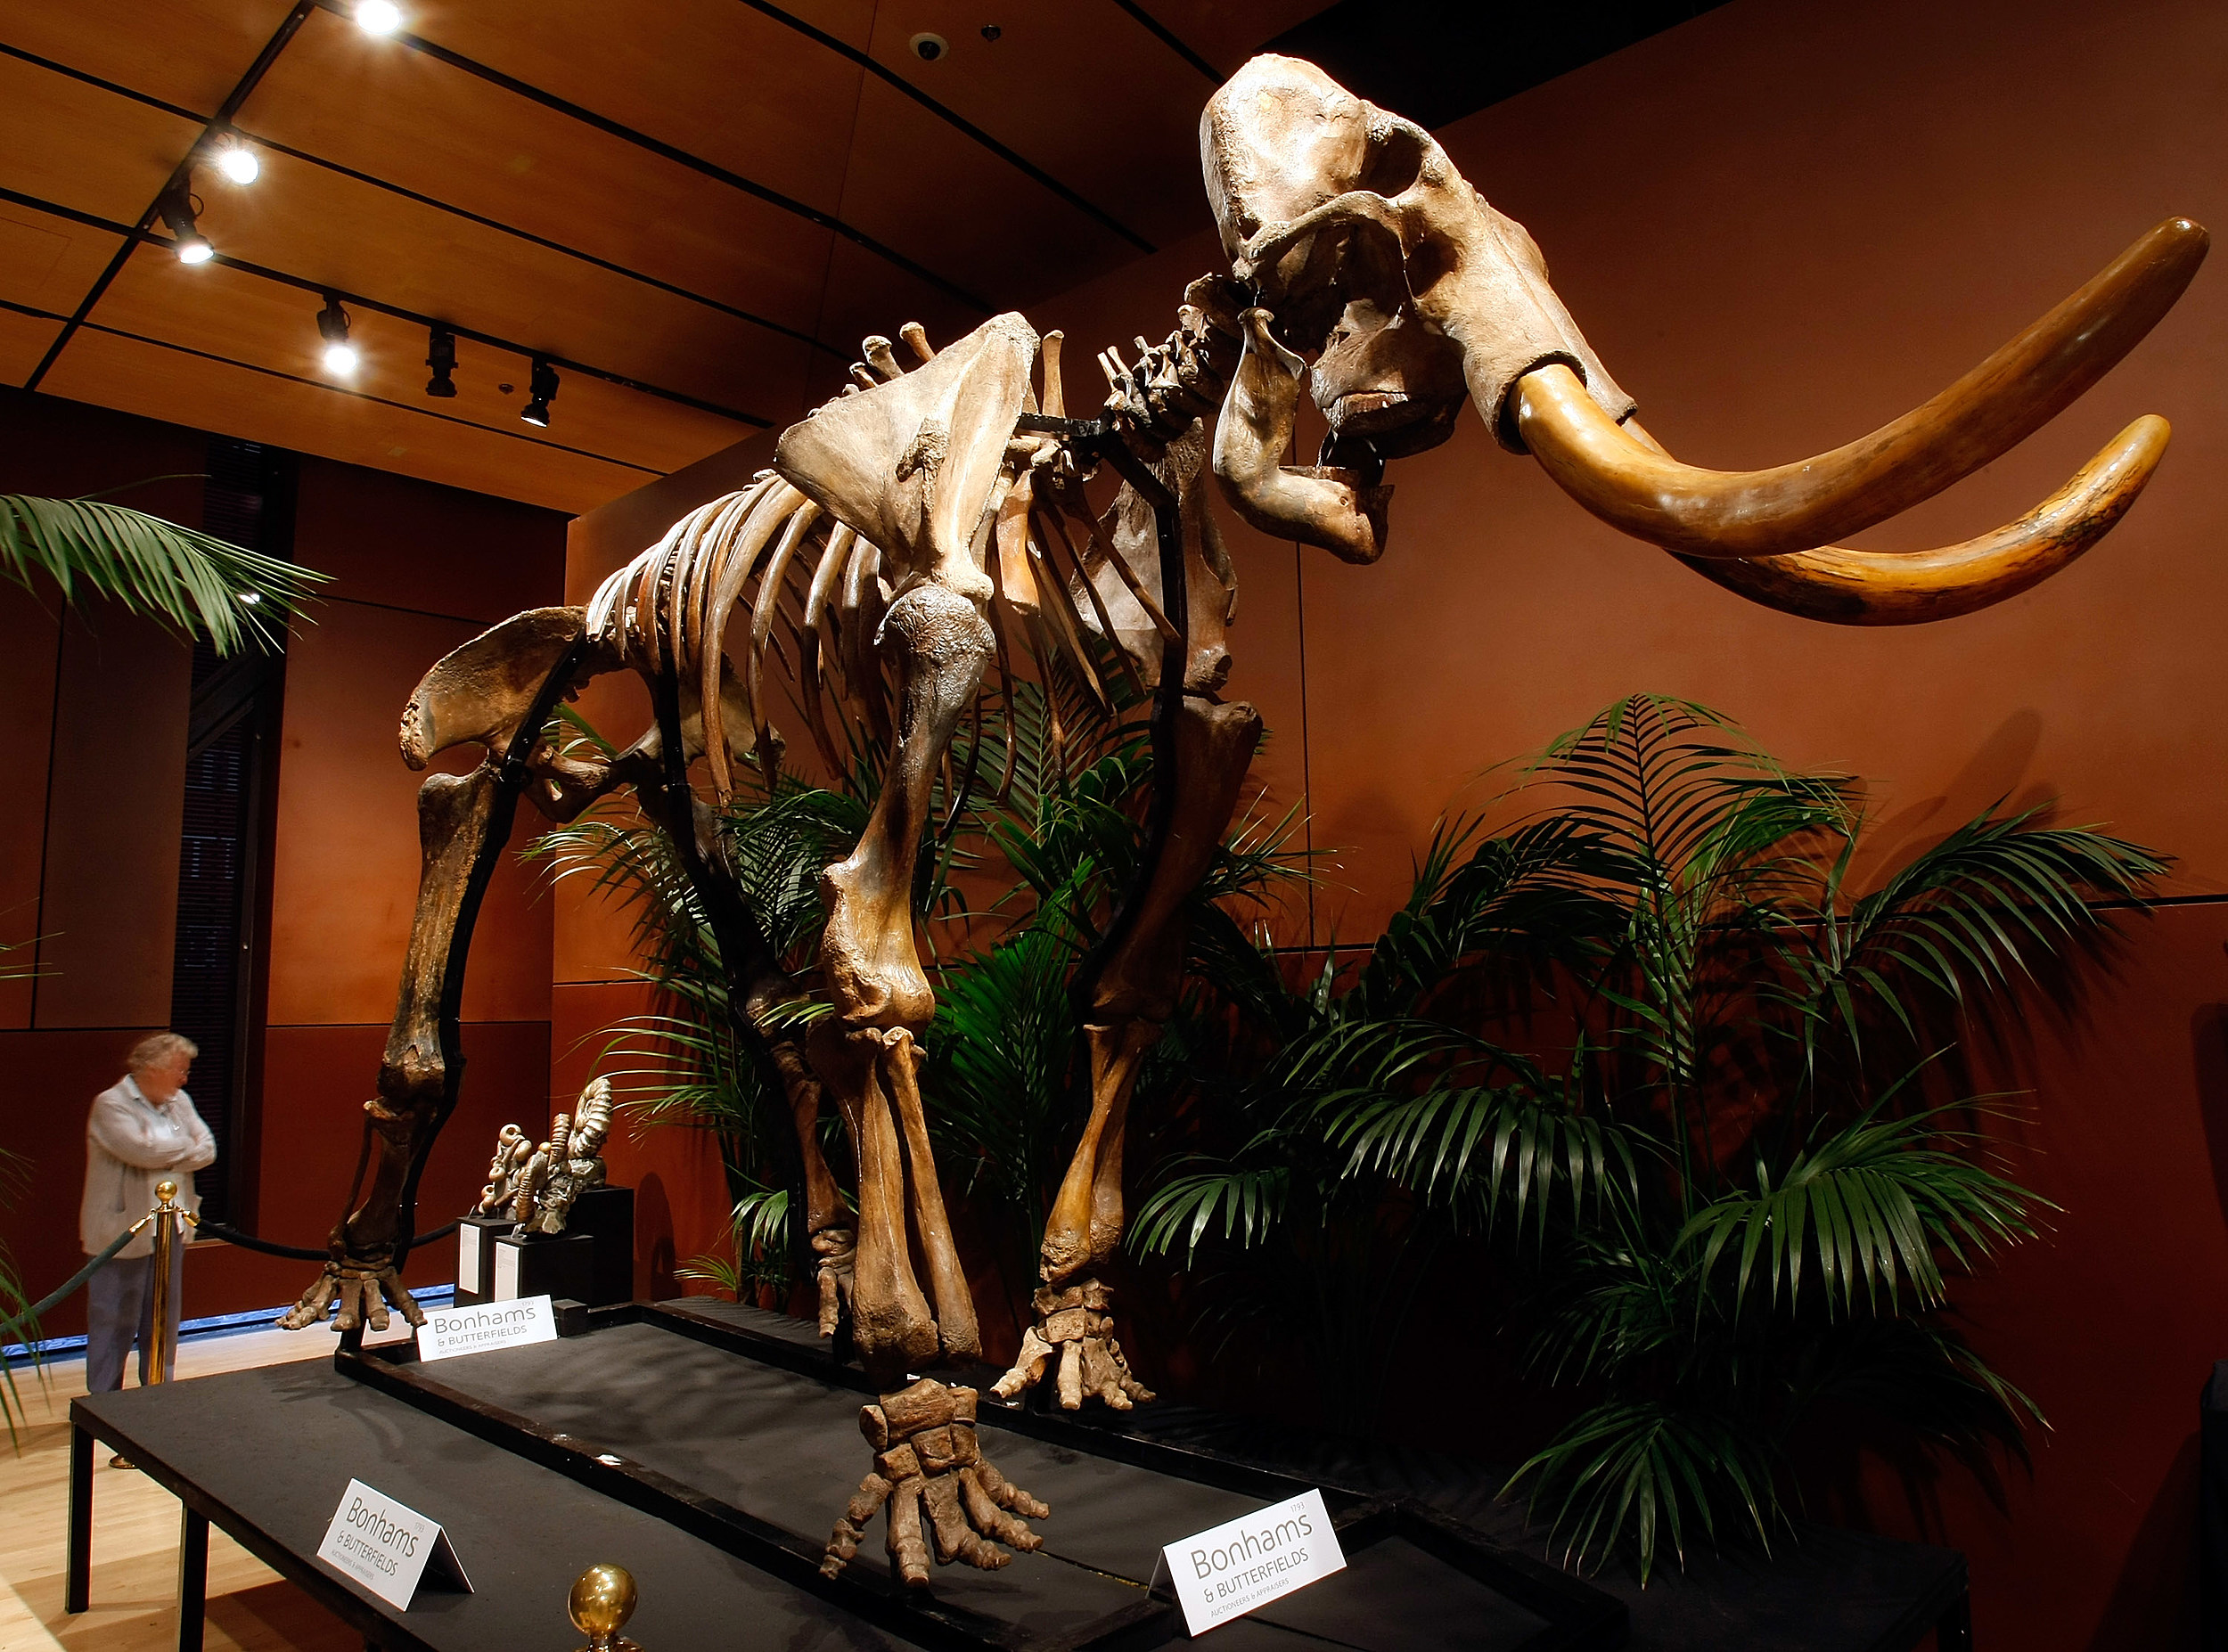 A Texas Company Is Working To De-Extinct The Wooly Mammoth